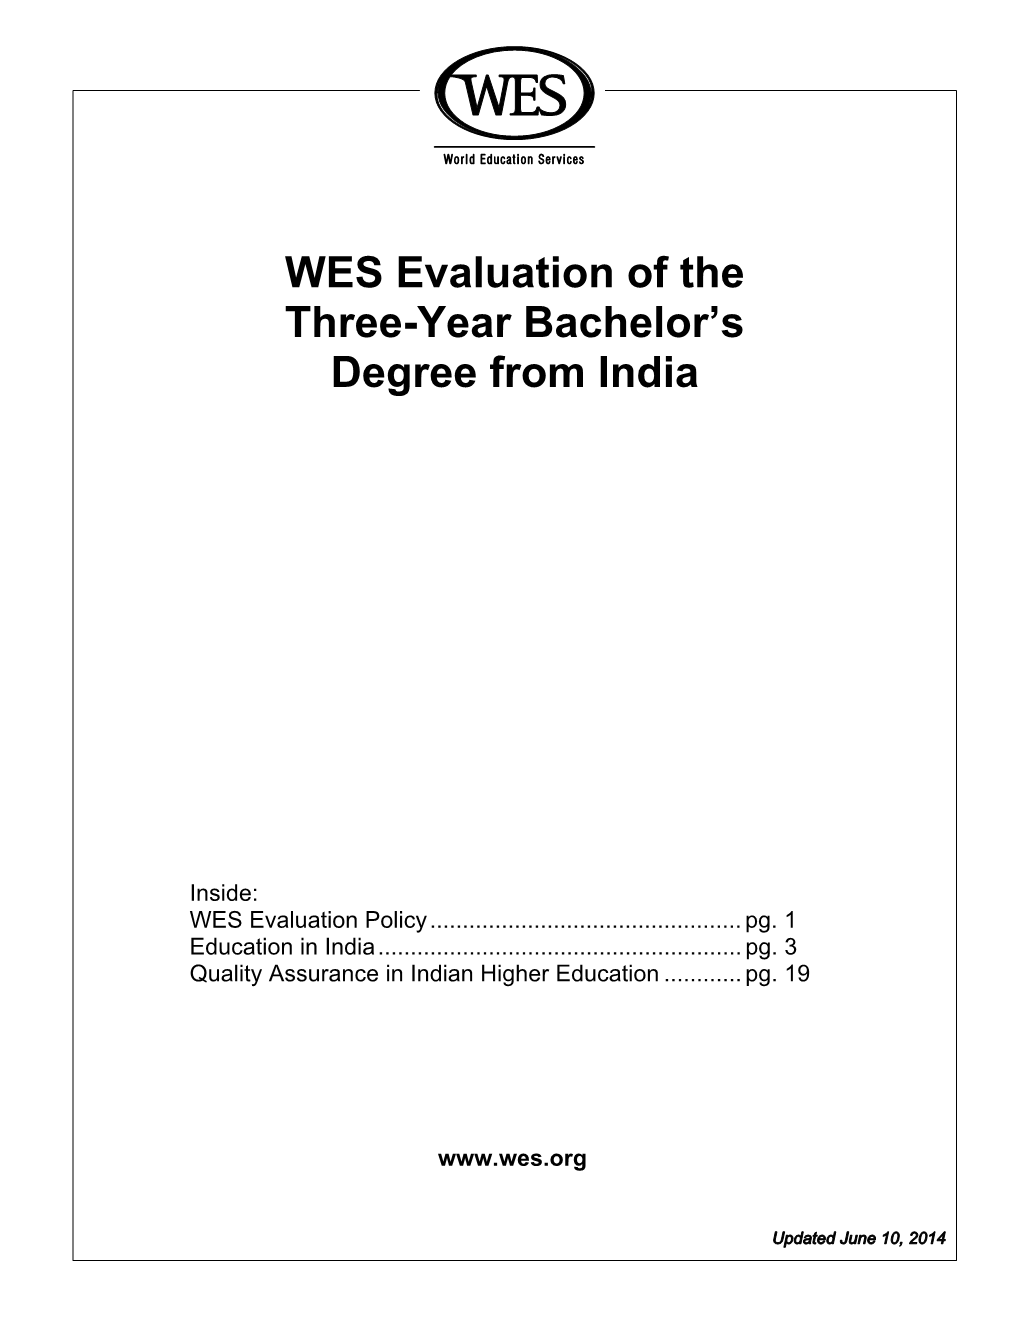 WES Evaluation of the Three-Year Bachelor's Degree from India